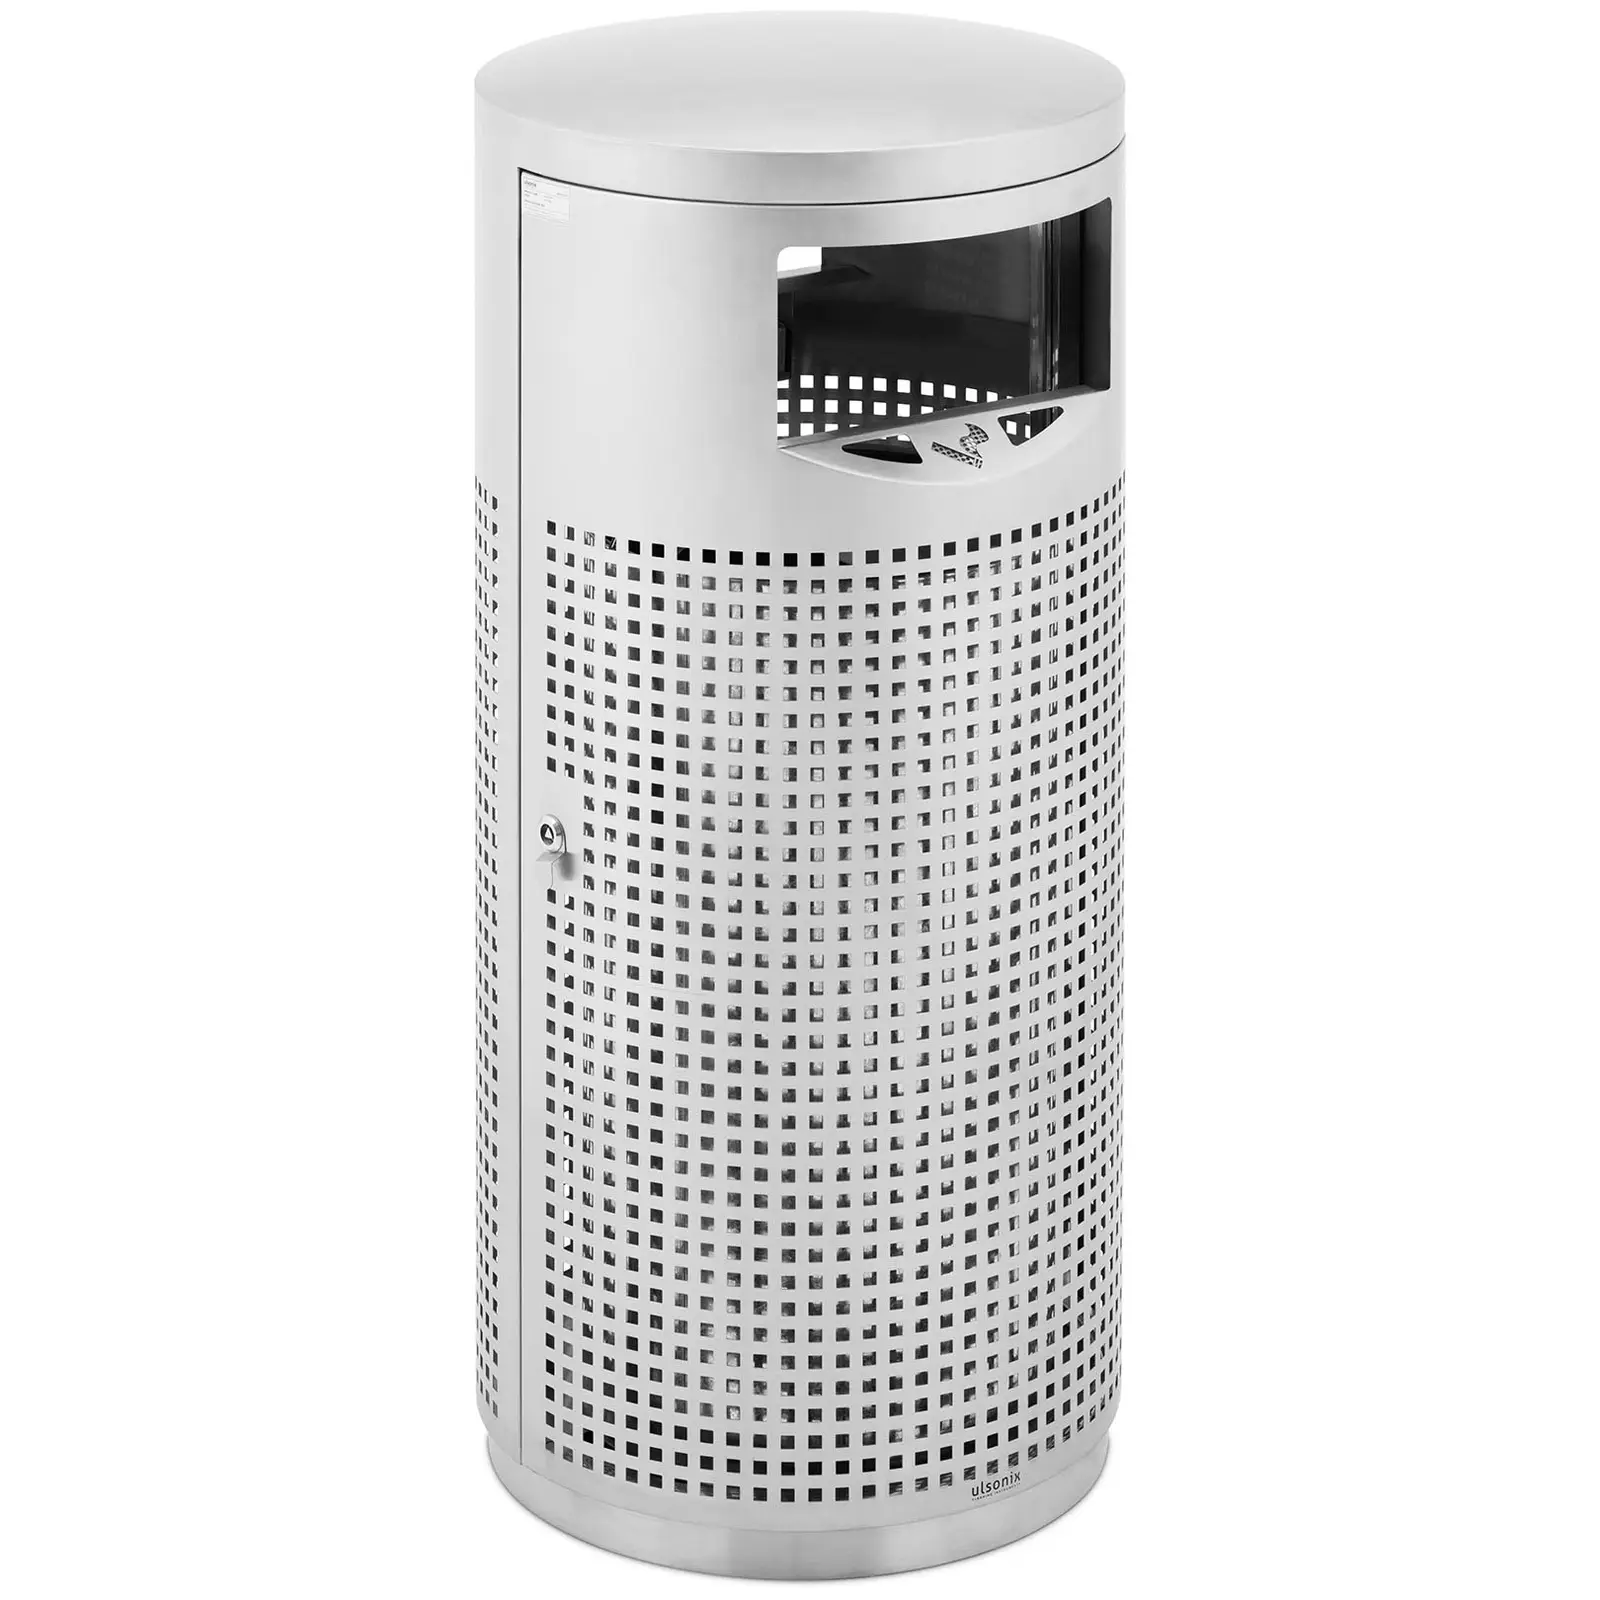 Rubbish Bin - round - with ashtray - stainless steel / galvanised steel - grey